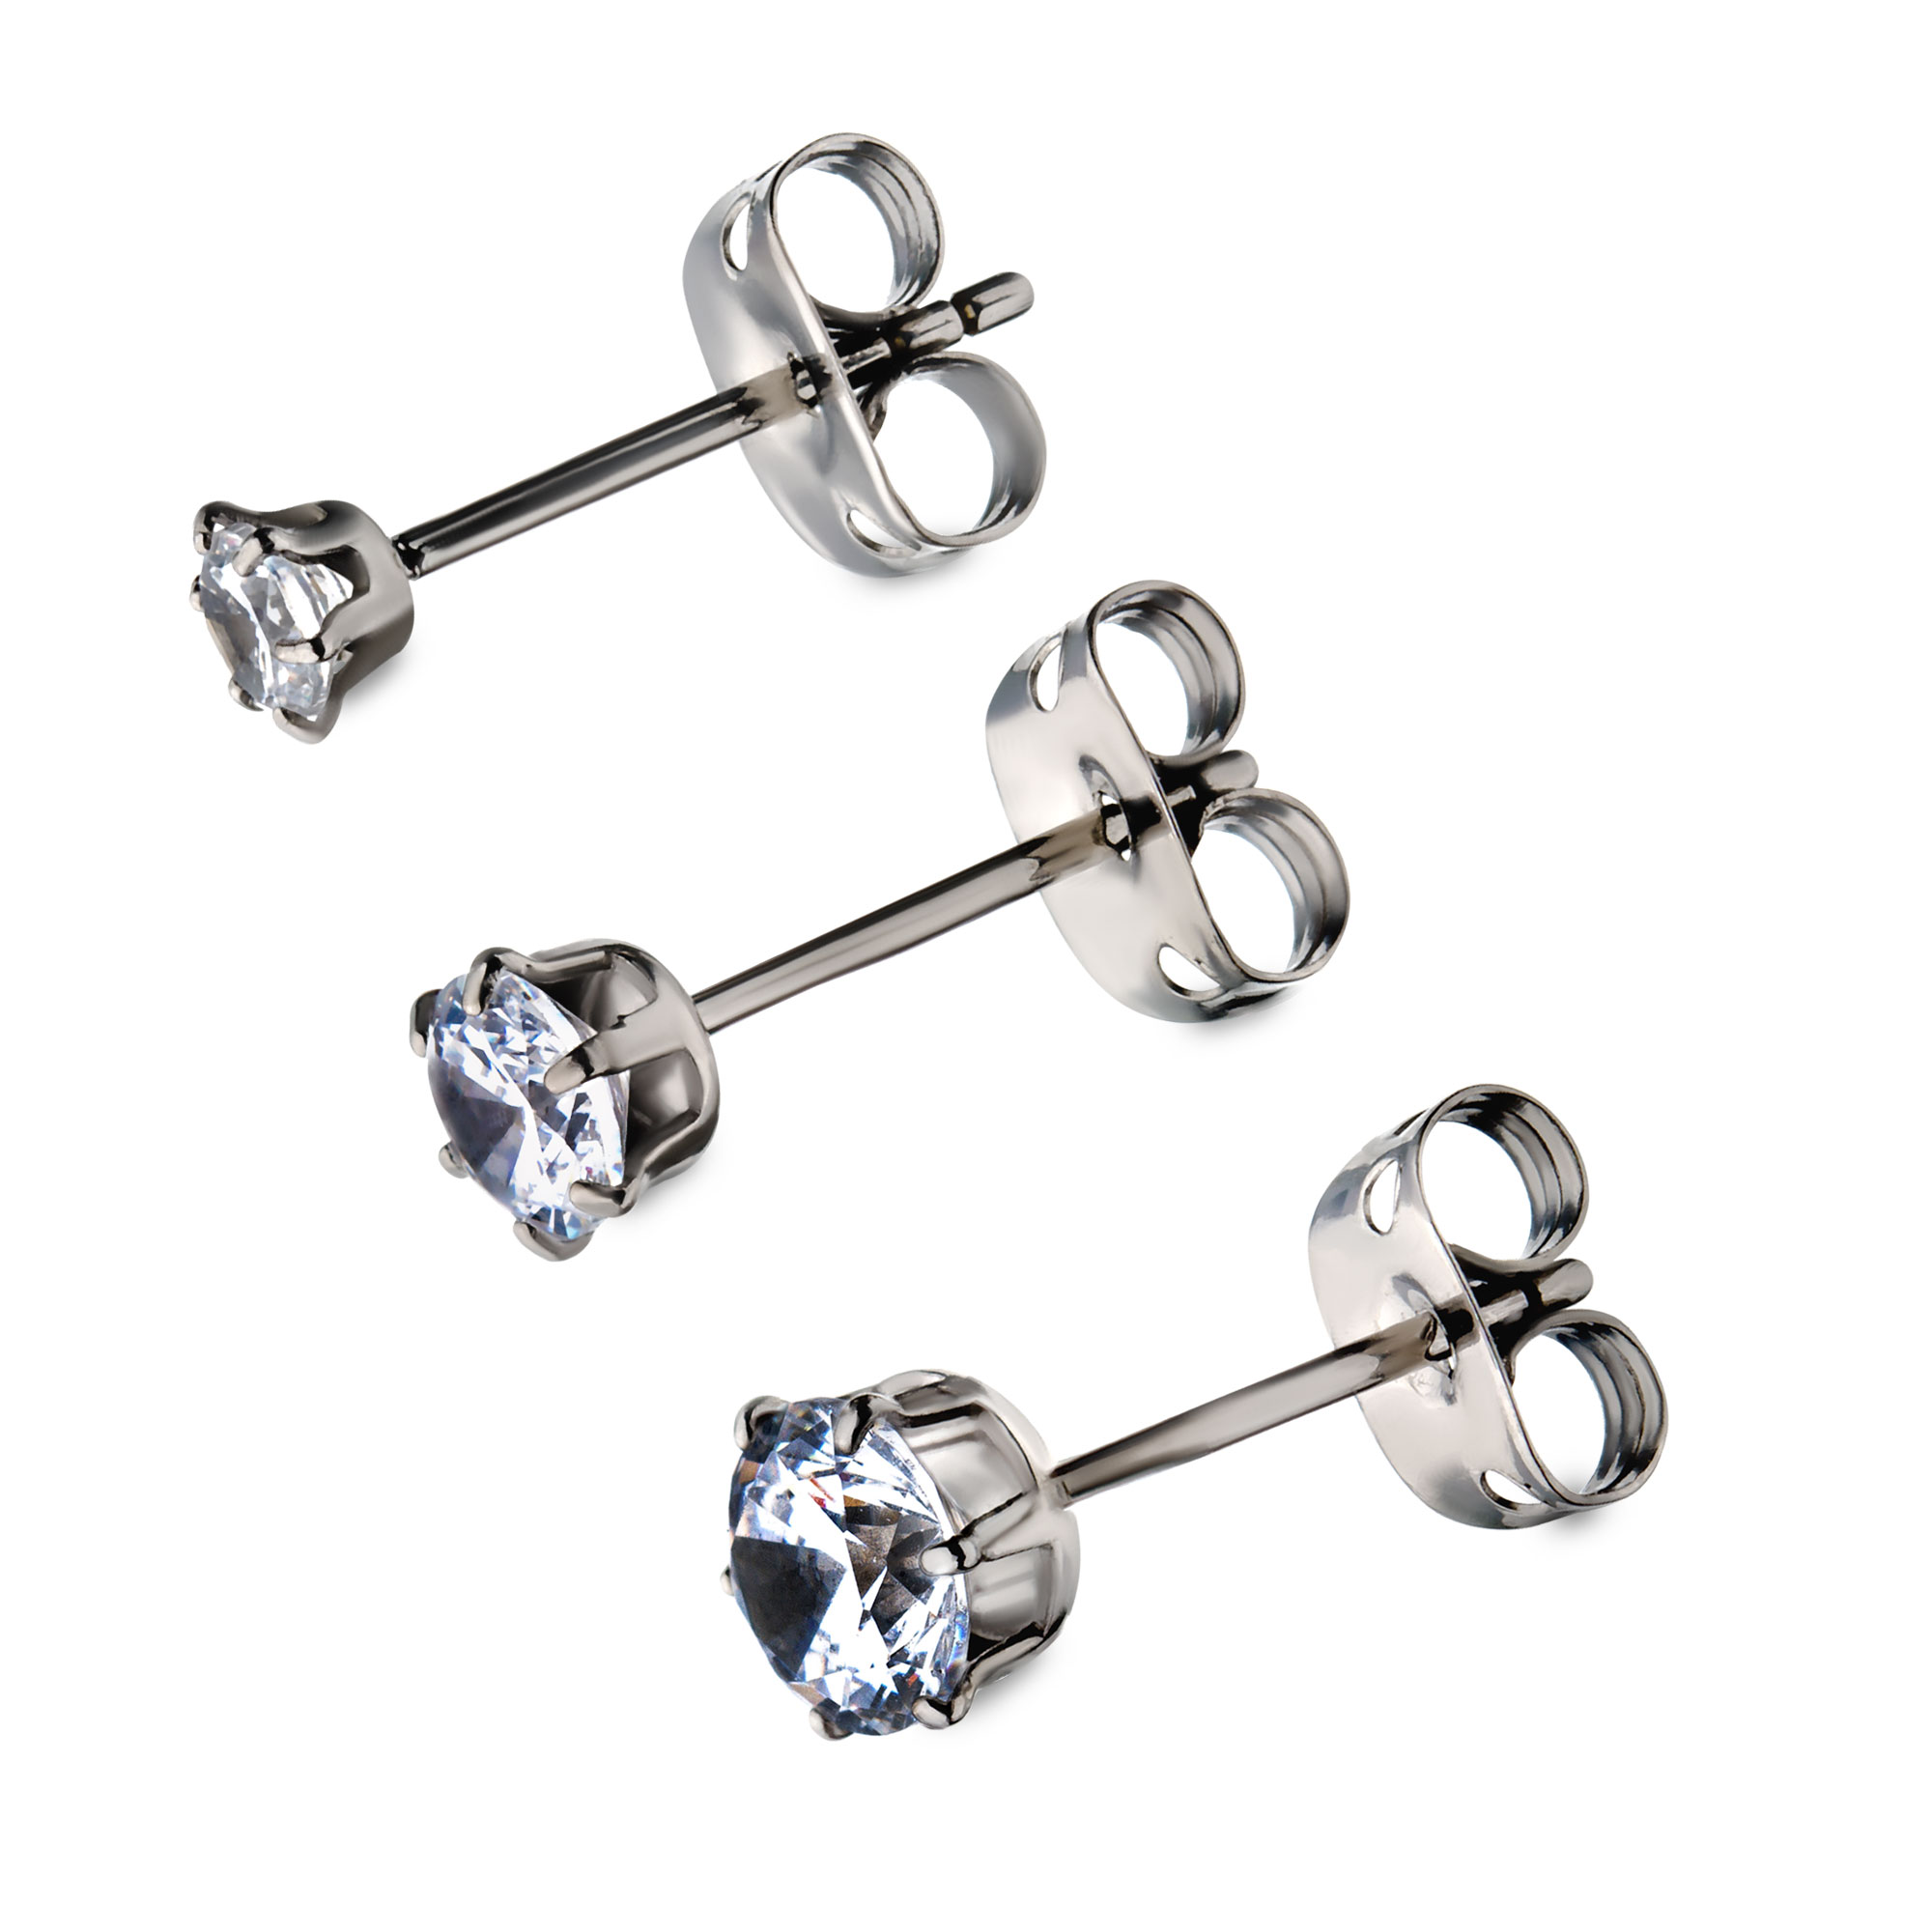 20g Titanium Post and Butterfly Back with Prong Set CZ Stud Earrings Image 2 Enchanted Jewelry Plainfield, CT